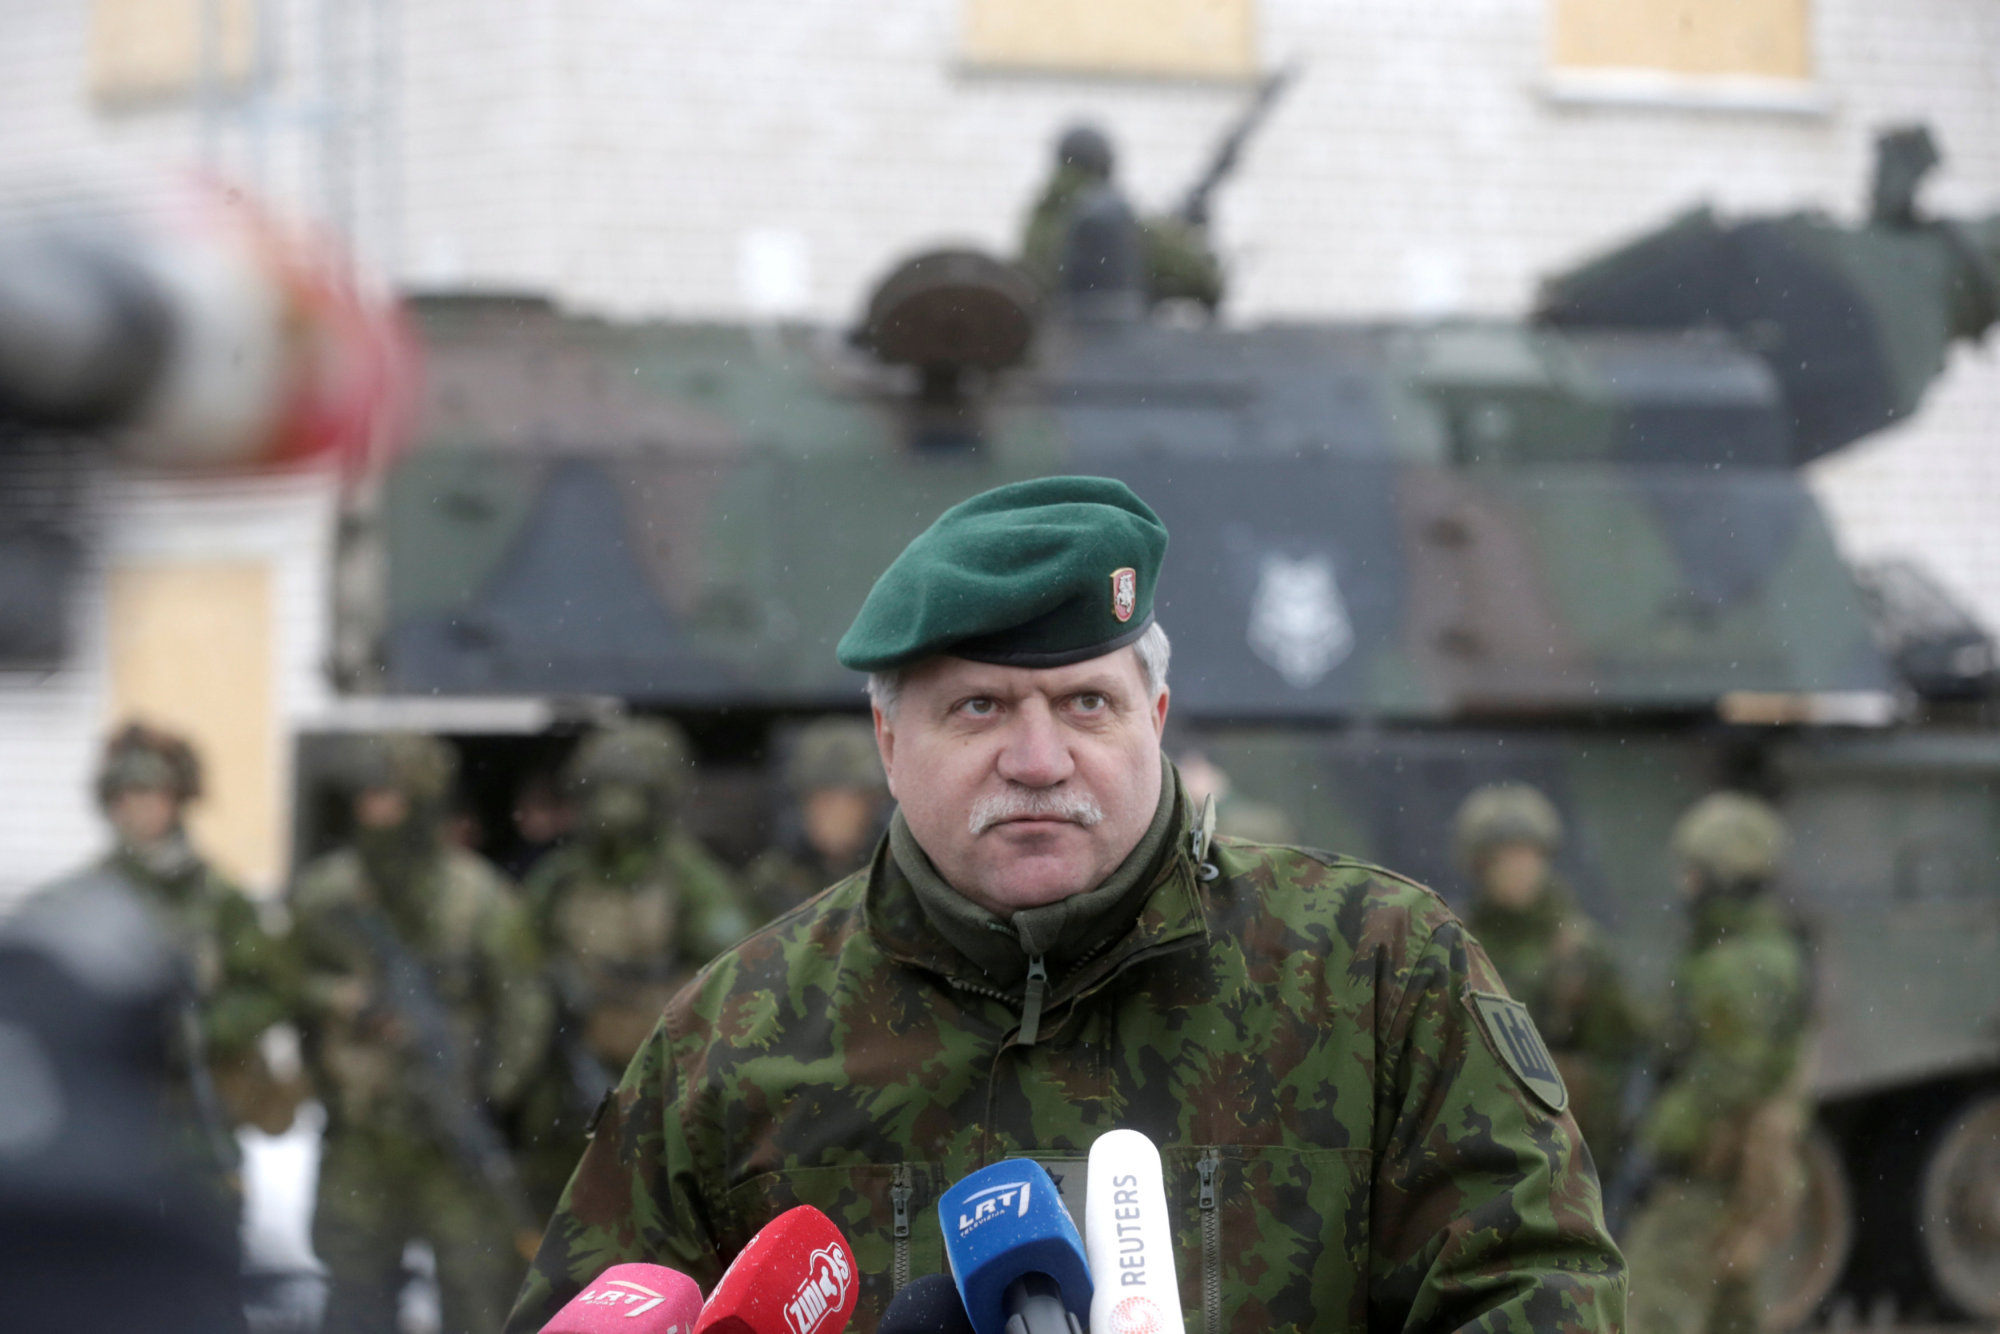 Chief of Defence of Lithuania, Jonas Vytautas Zukas, speaks to media during 12 NATO nations exercise in urban warfare during Iron Sword exercise in the mock town near Pabrade, Lithuania, Dec. 2. | REUTERS